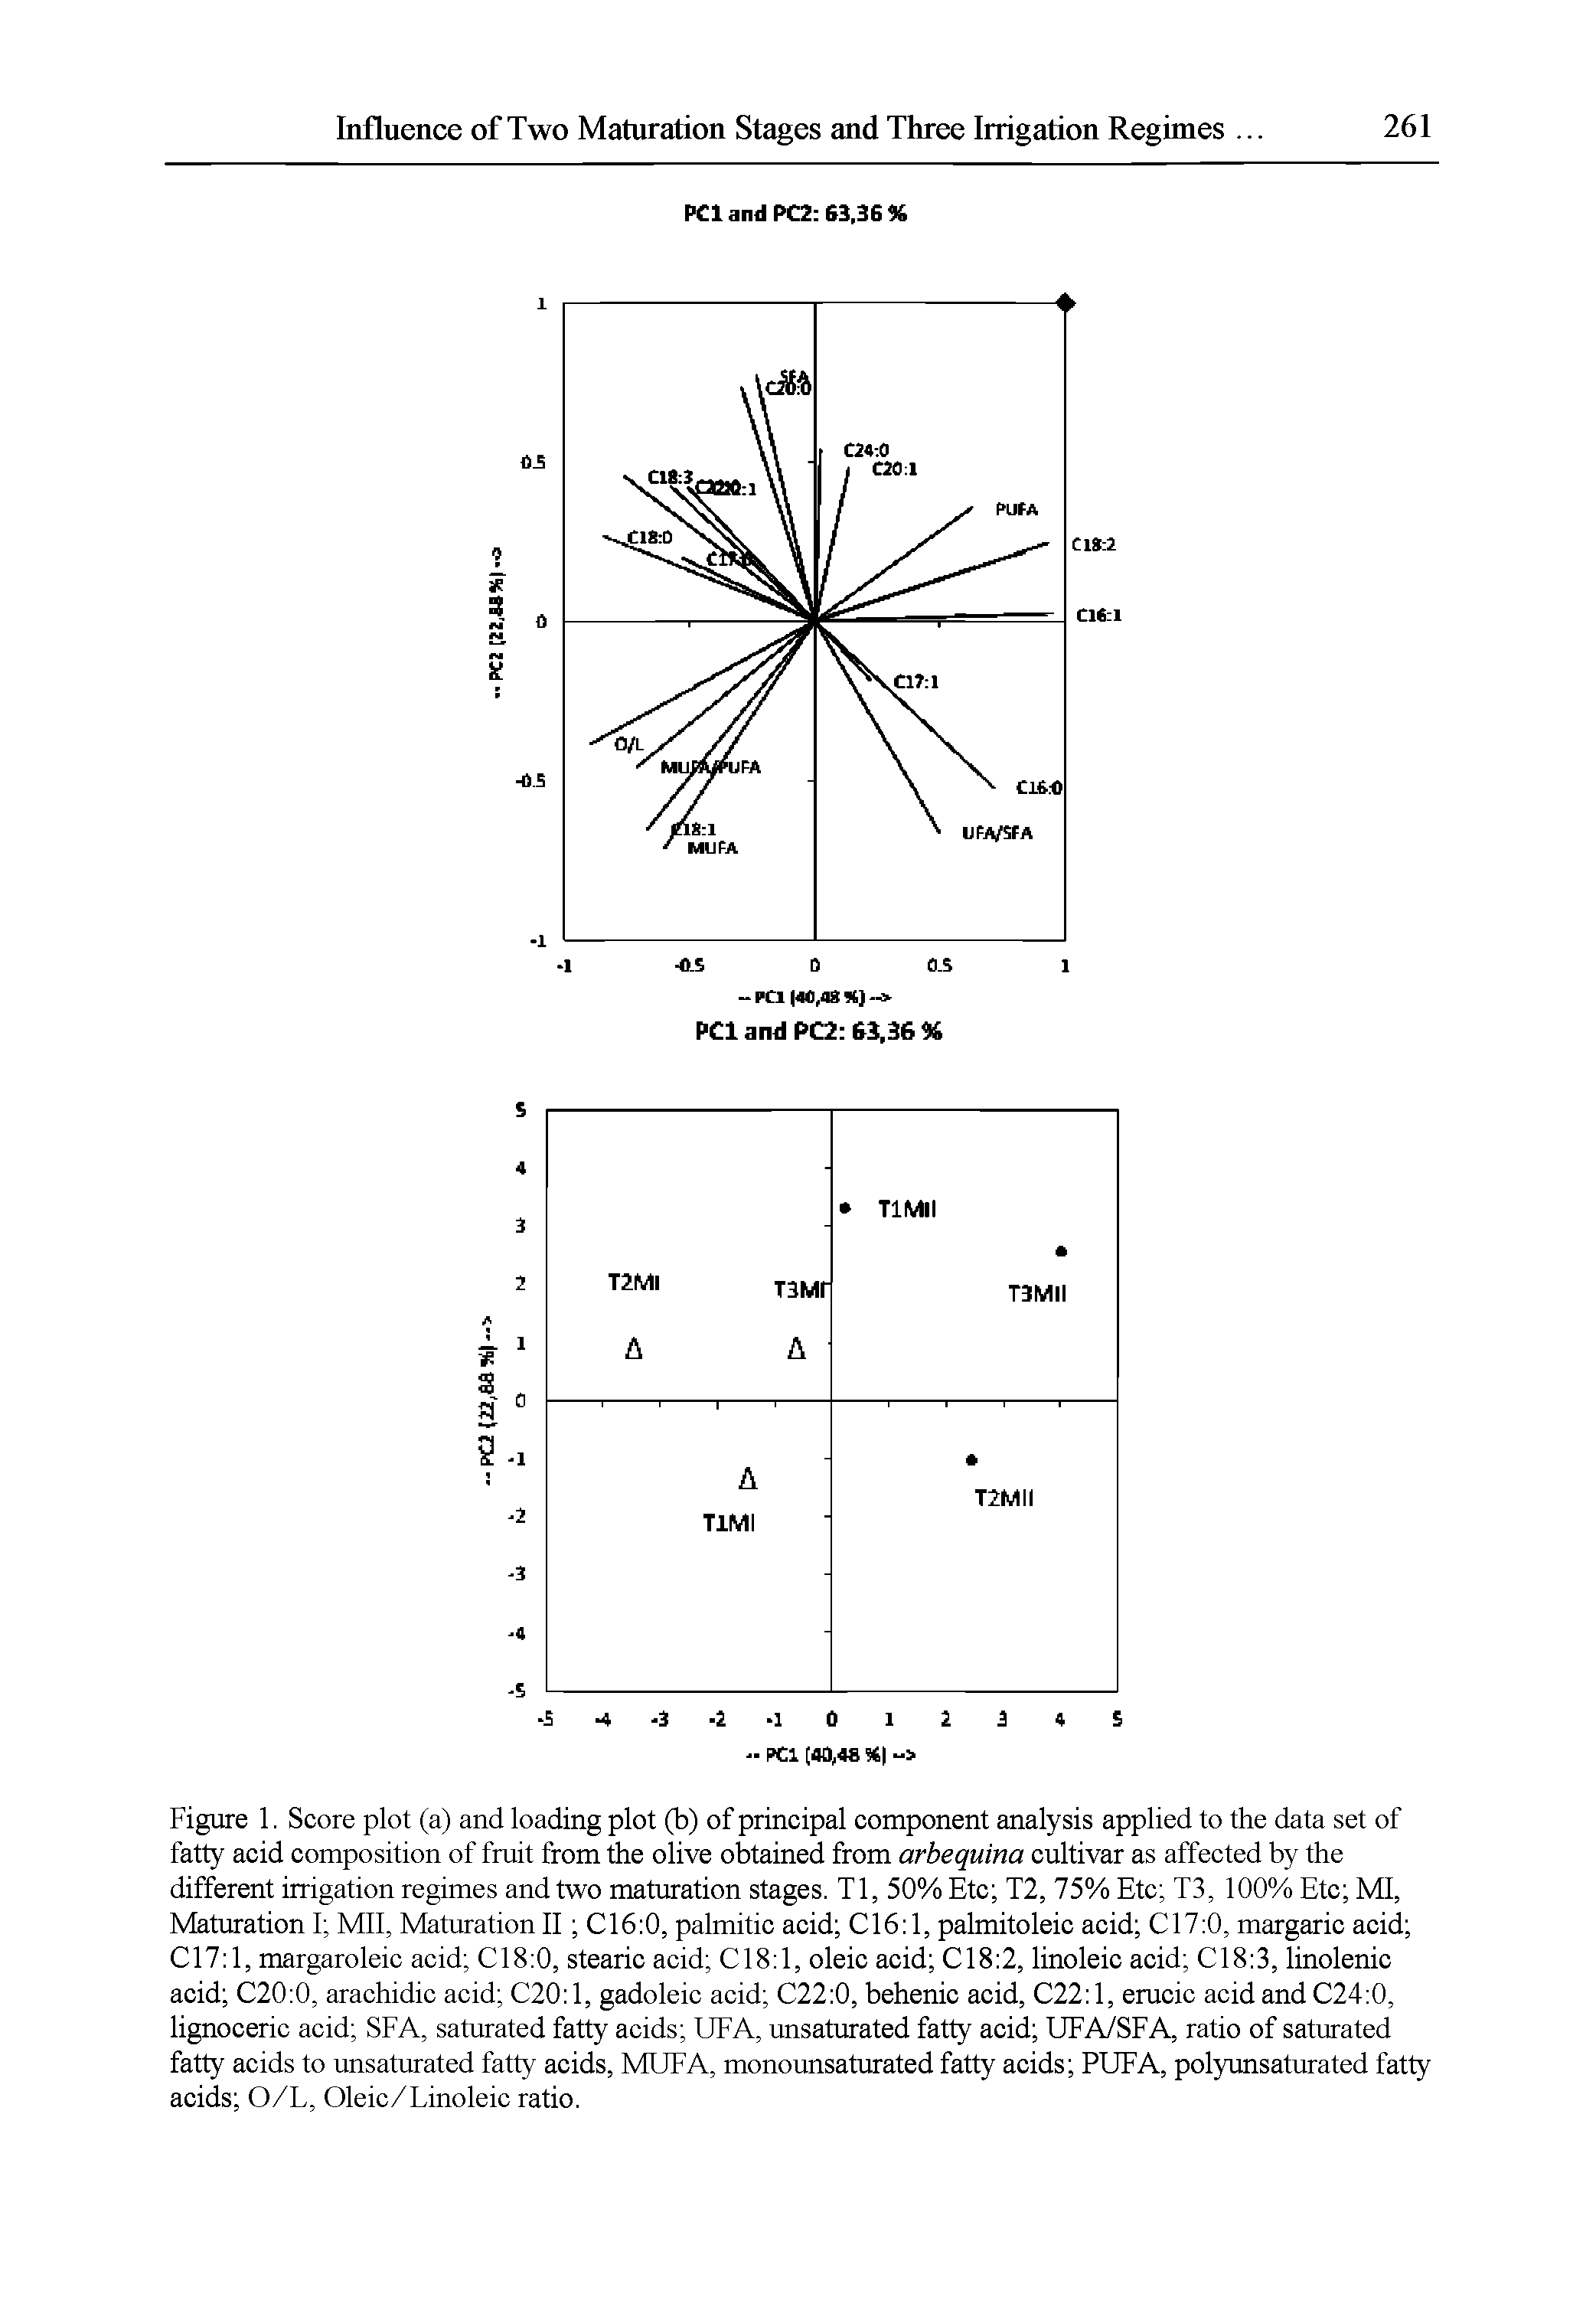 Figure 1. Score plot (a) and loading plot (b) of principal component analysis applied to the data set of fatty acid composition of fruit from the olive obtained from arbequina cultivar as affected by the different irrigation regimes and two maturation stages. Tl, 50% Etc T2, 75% Etc T3, 100% Etc MI, Maturation I Mil, Maturation II CI6 0, palmitic acid C16 l, pahnitoleic acid C17 0, margaric acid C17 l, margaroleic acid C18 0, stearic acid C18 l, oleic acid C18 2, linoleic acid C18 3, linolenic acid C20 0, arachidic acid C20 1, gadoleic acid C22 0, behenic acid, C22 1, erucic acid and C24 0, lignoceric acid SFA, saturated fatty acids UFA, unsaturated fatty acid UFA/SFA, ratio of saturated fatty acids to unsaturated fatty acids, MUFA, monounsaturated fatty acids PUFA, polyunsaturated fatty acids O/L, Oleic/Linoleic ratio.